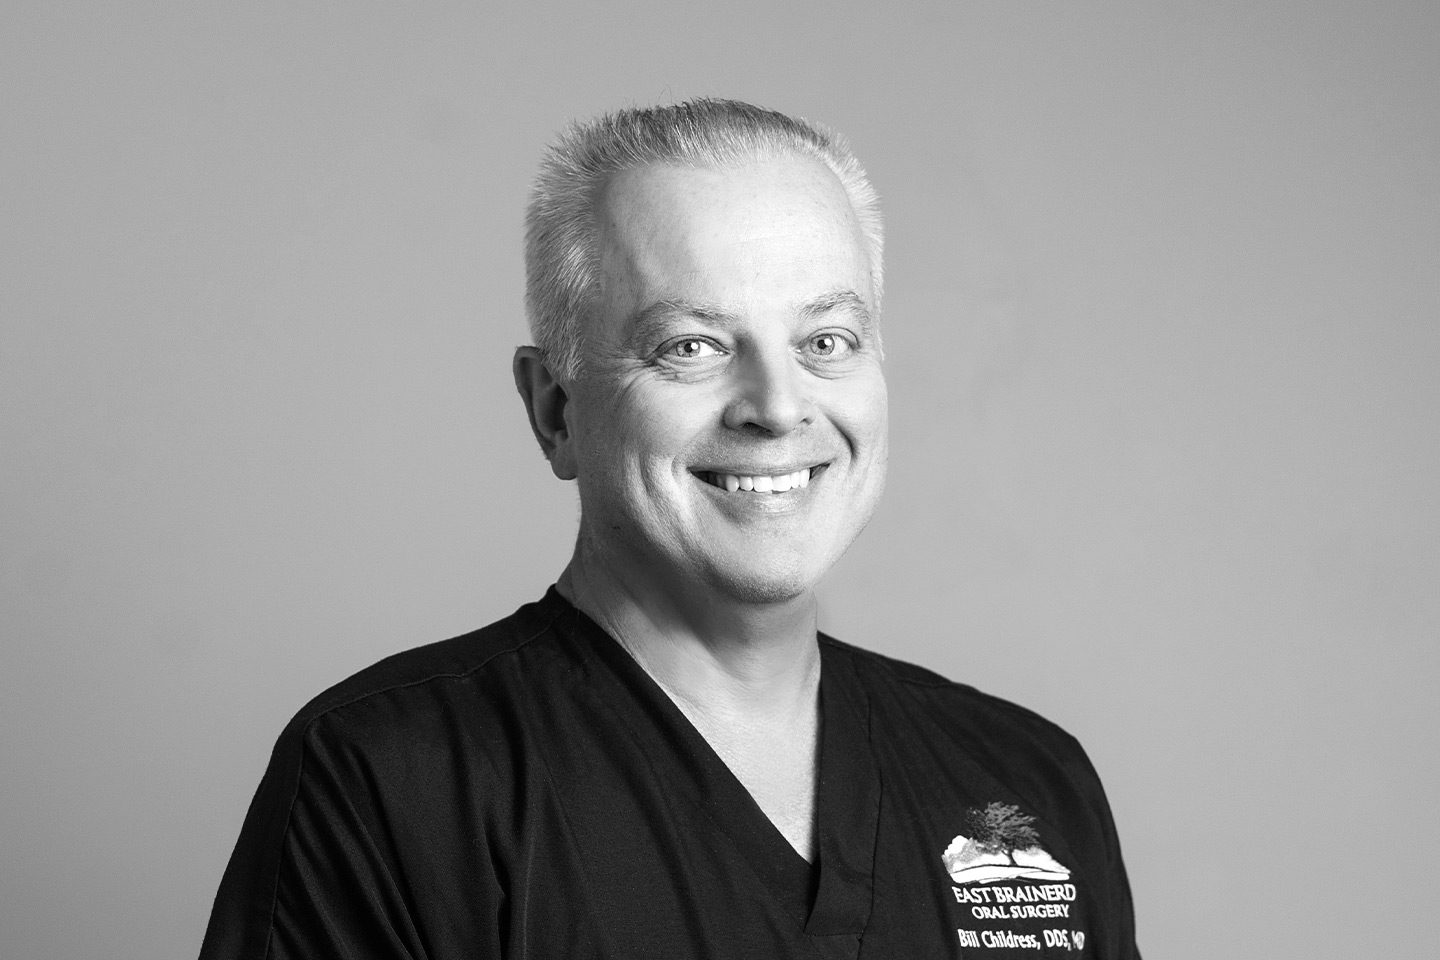 Dr. Bill Childress at Implants and Oral Surgery of Chattanooga